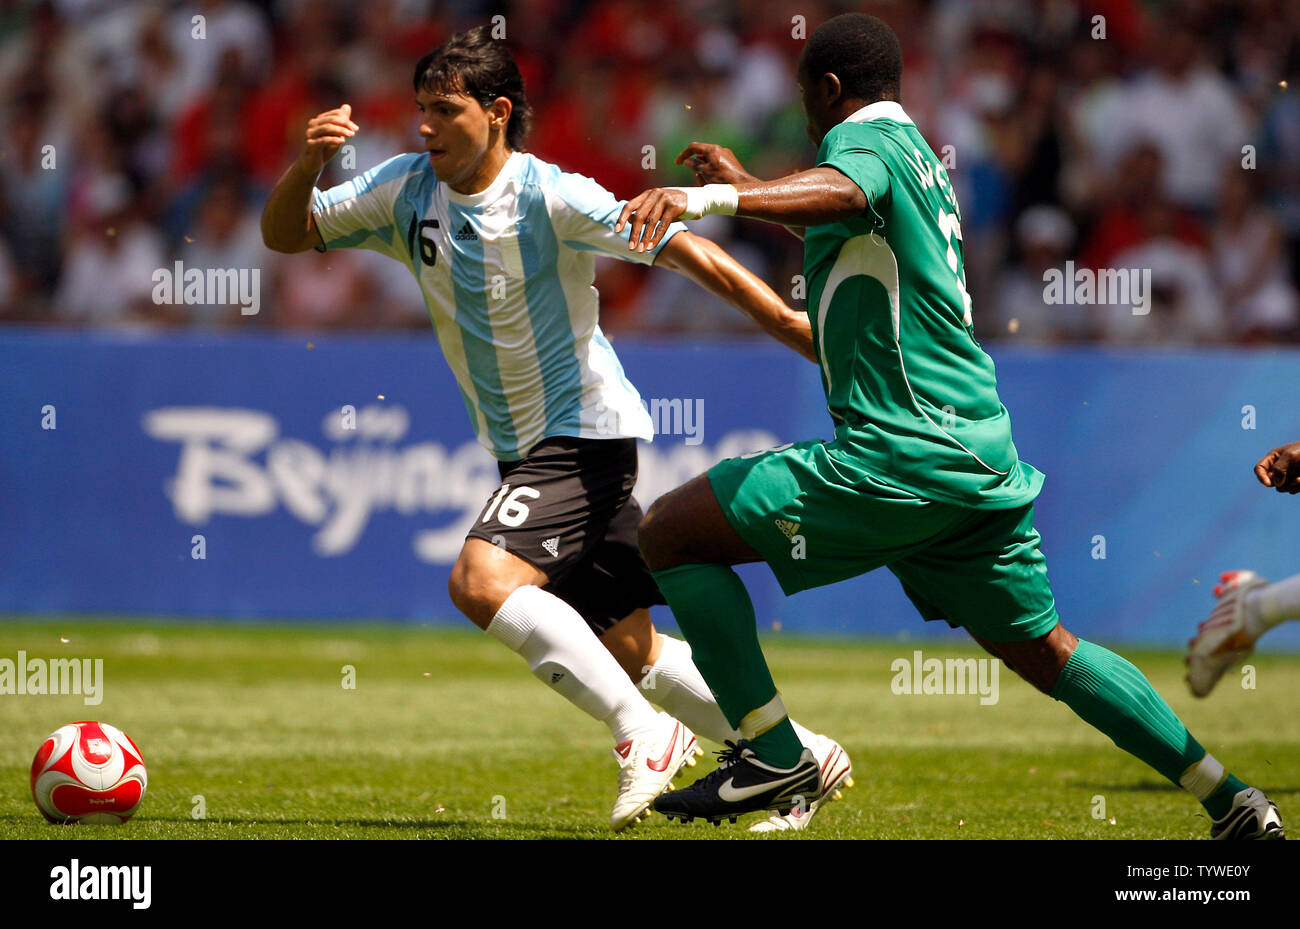 Argentina's Sergio Aguero (C) is trapped by   Nigeria's Olubayo Adefemi (L) and teammate Onyekachi Apam during the men's football final in the Beijing 2008 Olympic Games August 23, 2008.  Argentina won 1-0 for the gold, while Nigeria settled for the silver and Brazil the bronze.  (UPI Photo/Stephen Shaver) Stock Photo